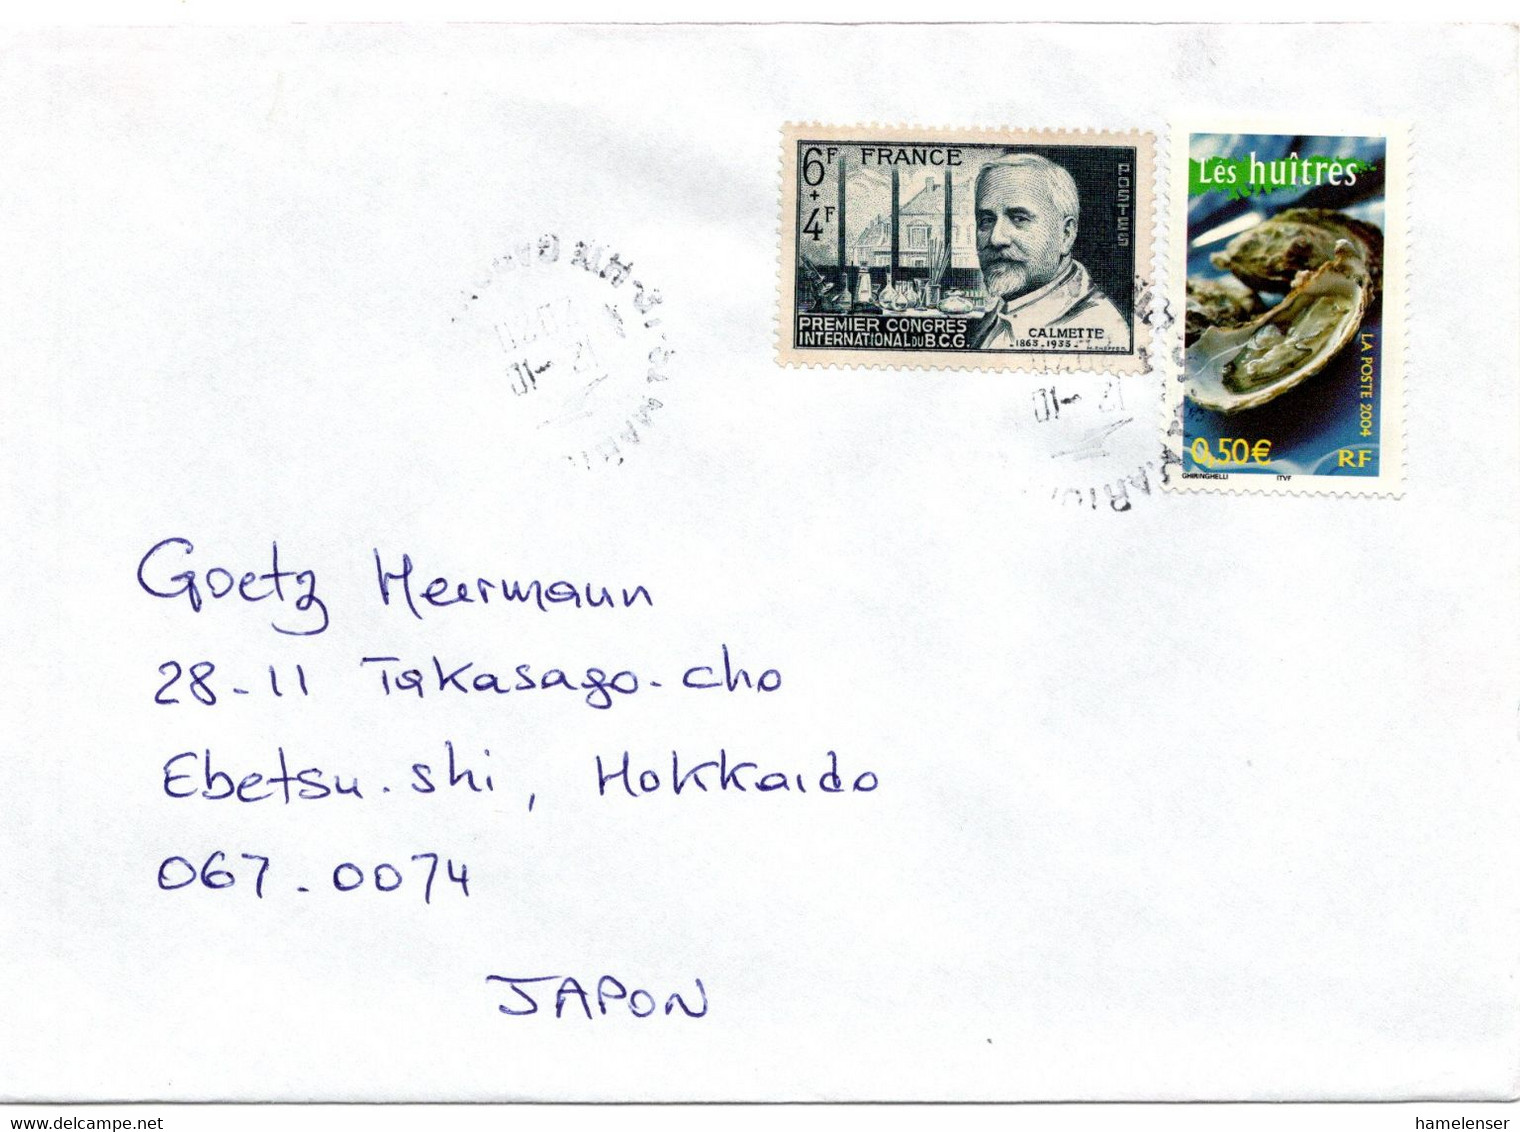 59584 - Frankreich - 2020 - €0,50 Austern '04 MiF A Bf ST MARTORY -> Japan - Covers & Documents